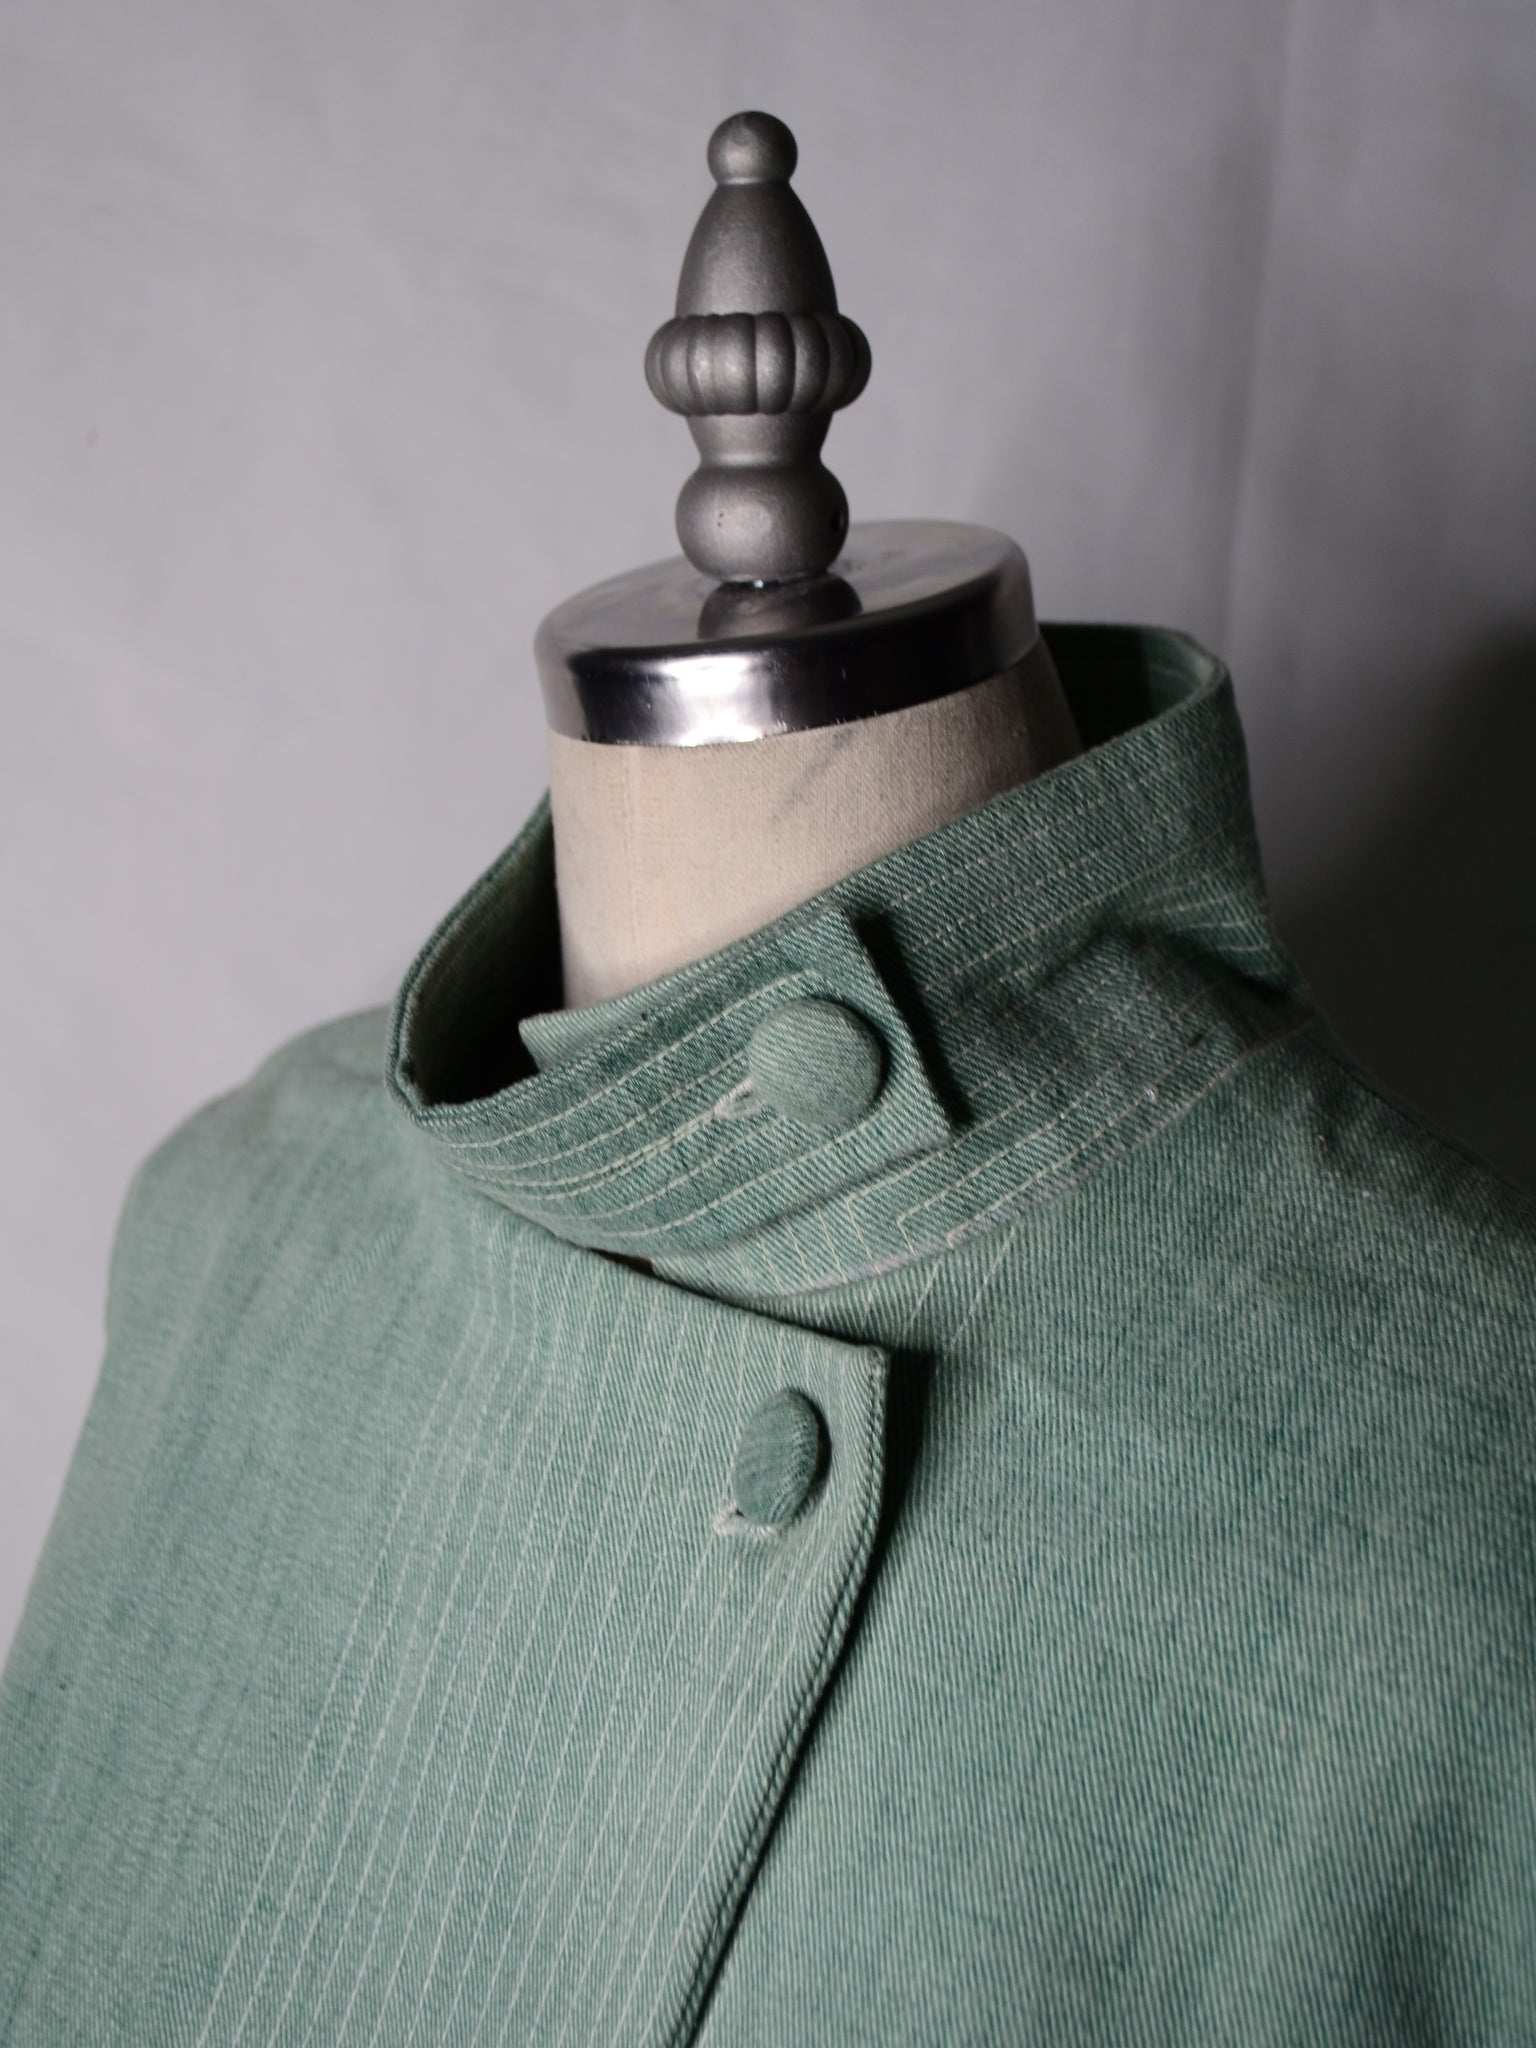 Copper Green Cropped Fencing Jacket (Women's US Small)